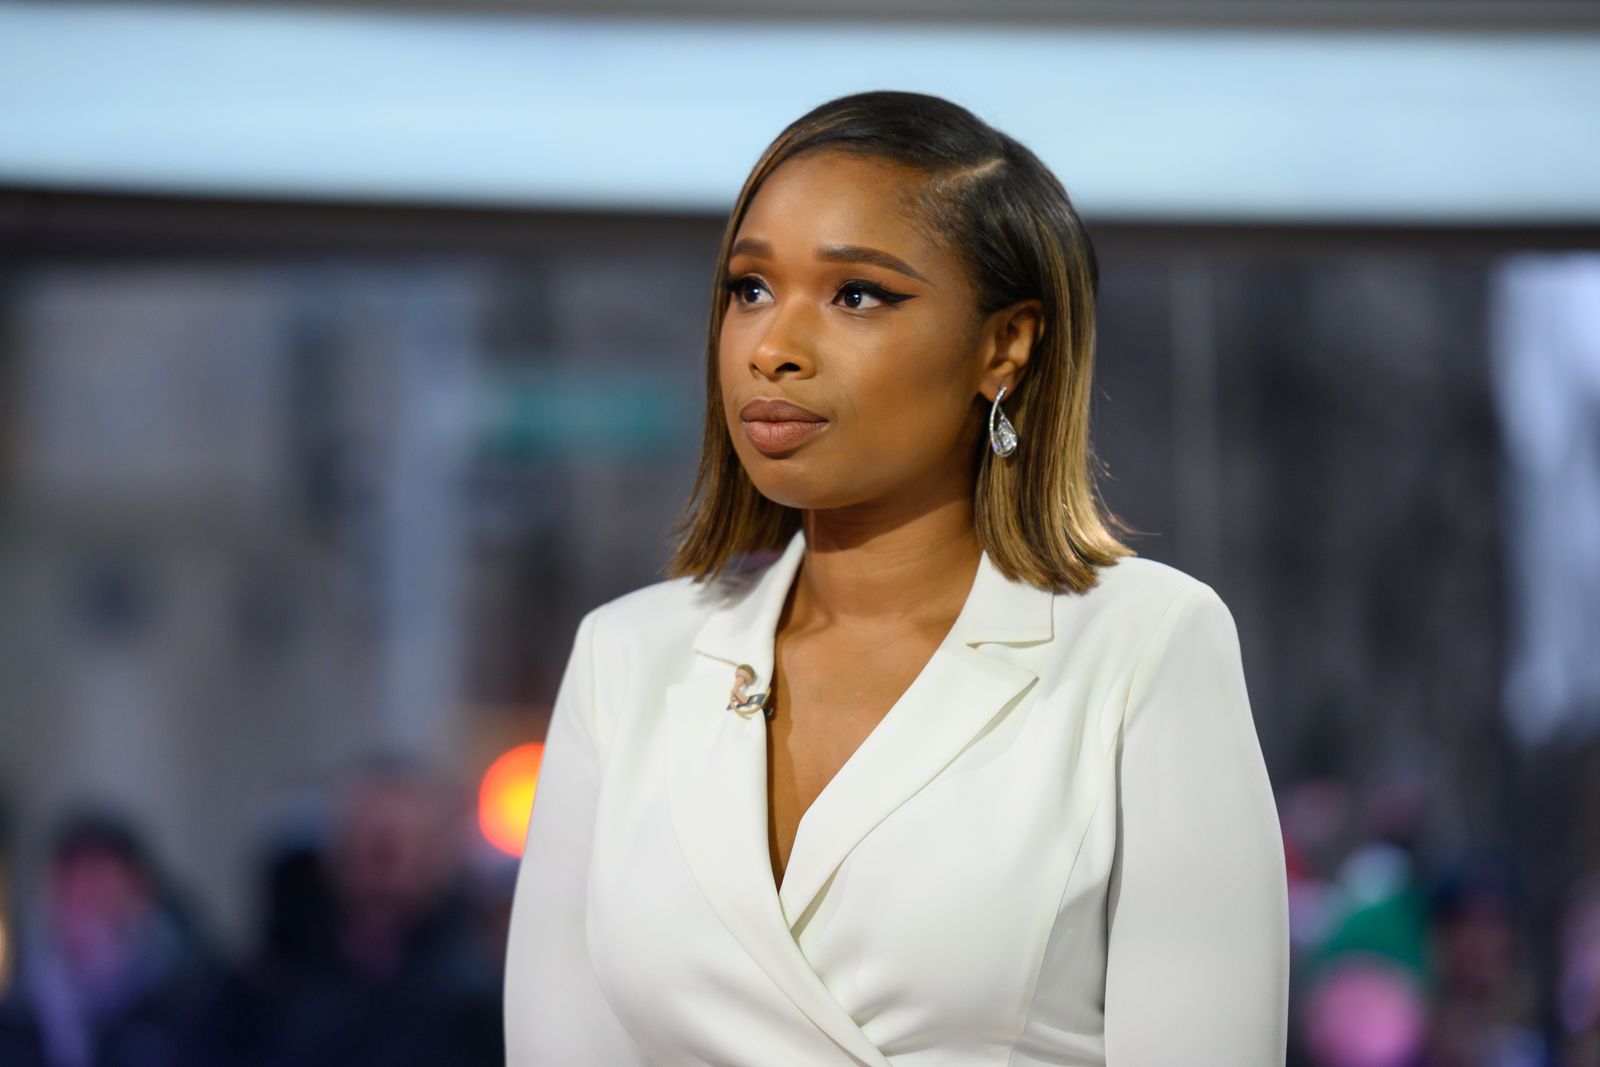 Jennifer Hudson at "Today" Season 68 on December 16, 2019 | Photo: Getty Images